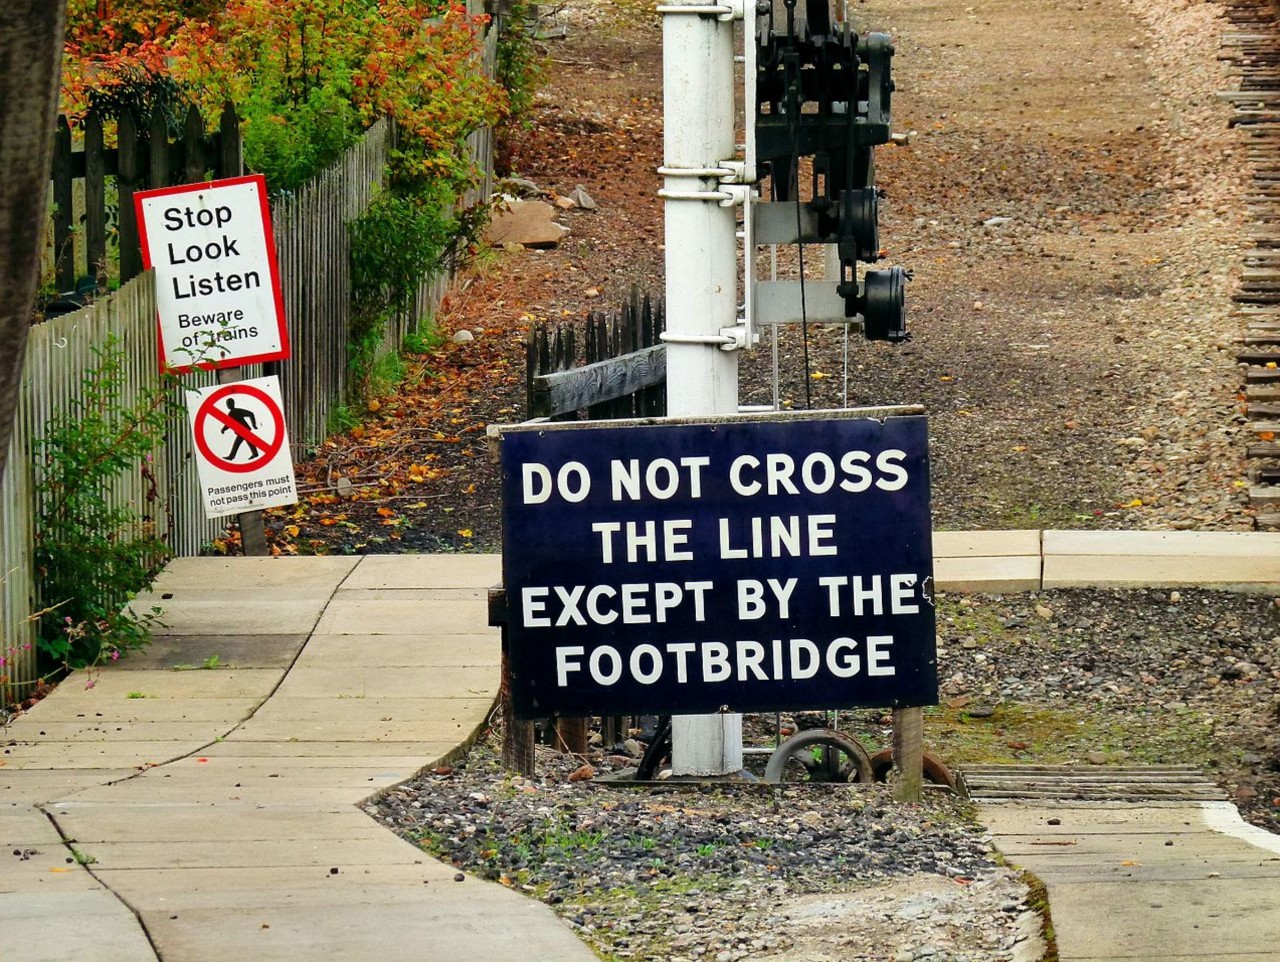 Grammar - Warning signs leading to a railroad crossing